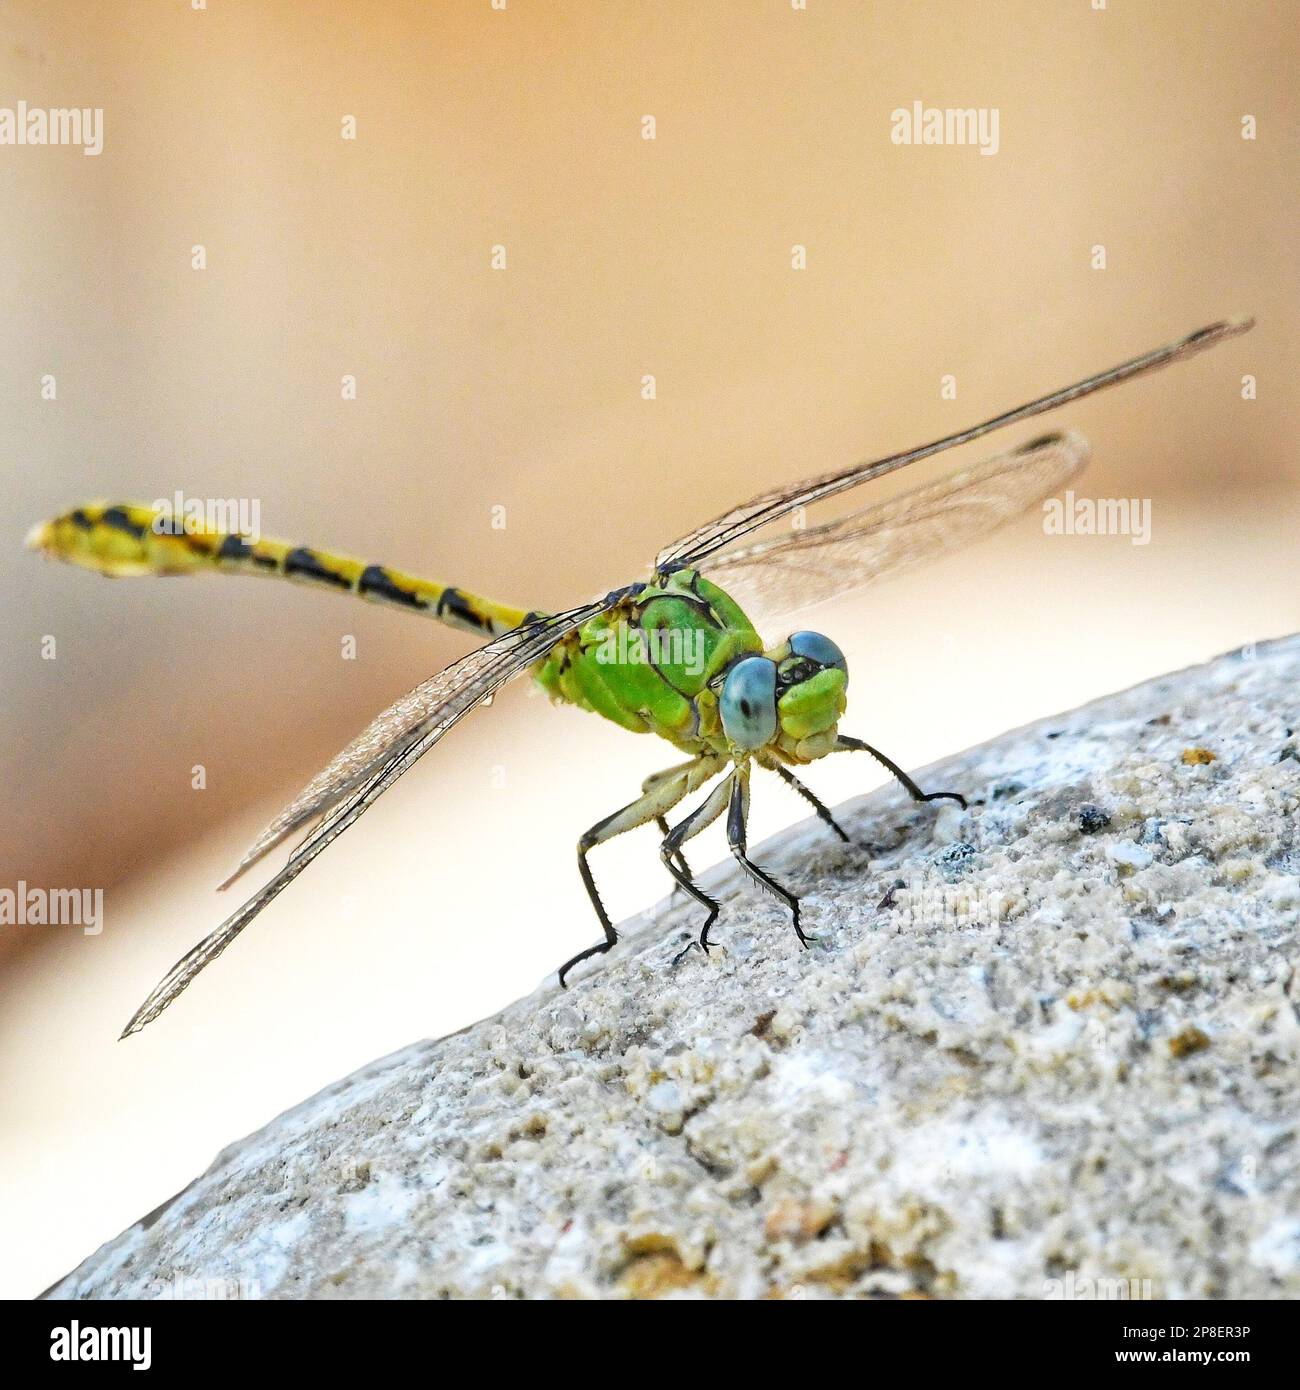 Close-up of a dragonfly on a rock Stock Photo